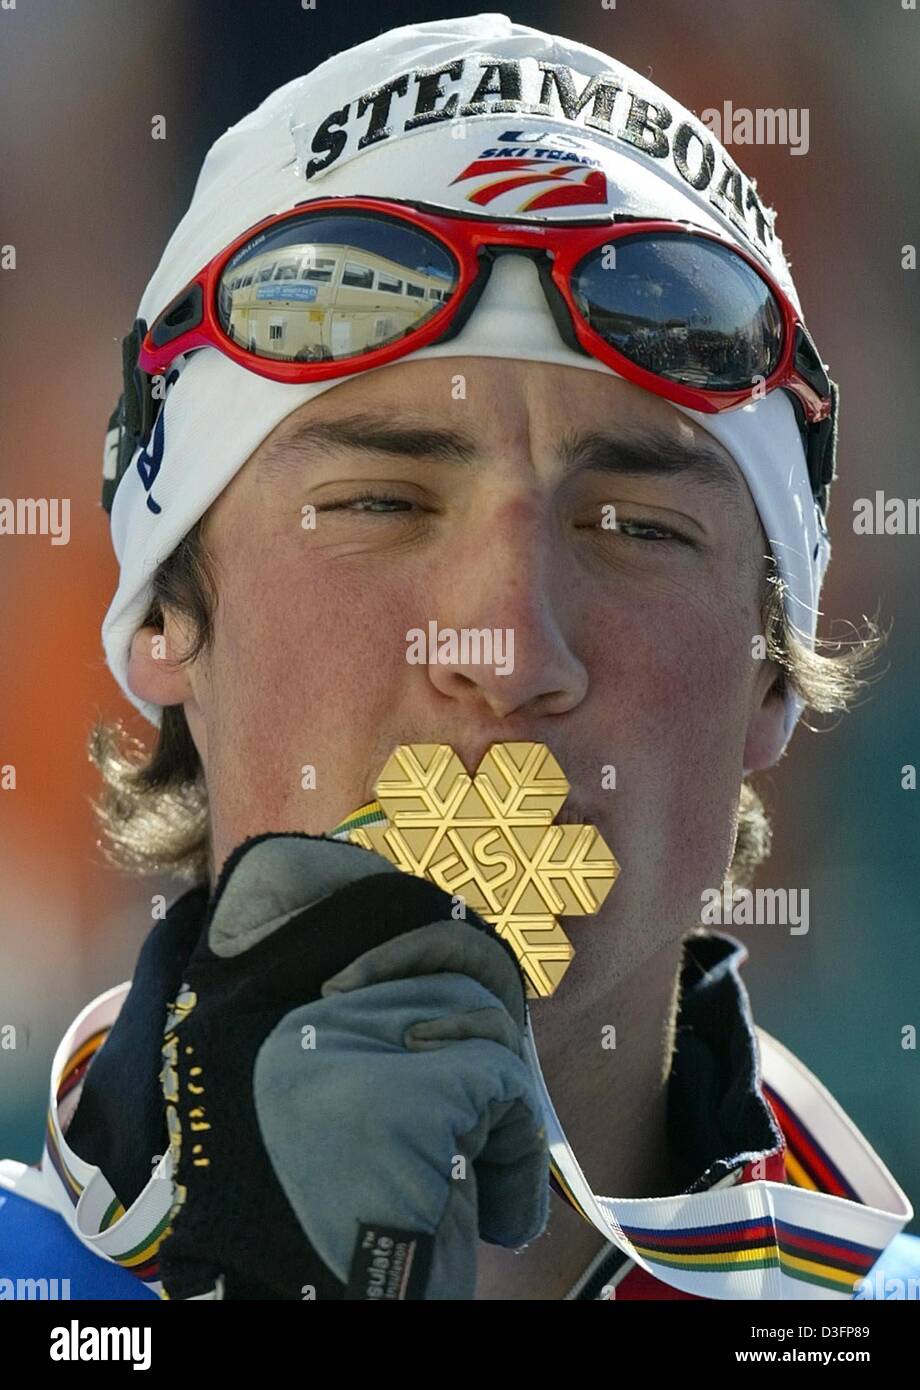 (dpa) - US skier Johnny Spillane kisses his gold medal during the award ceremony of the Nordic Skiing World Championships in Lago di Tesero in Val di Fiemme, Italy, 28 February 2003. He won the nordic combined gold medal in the 7.5km nordic combined sprint event. Stock Photo